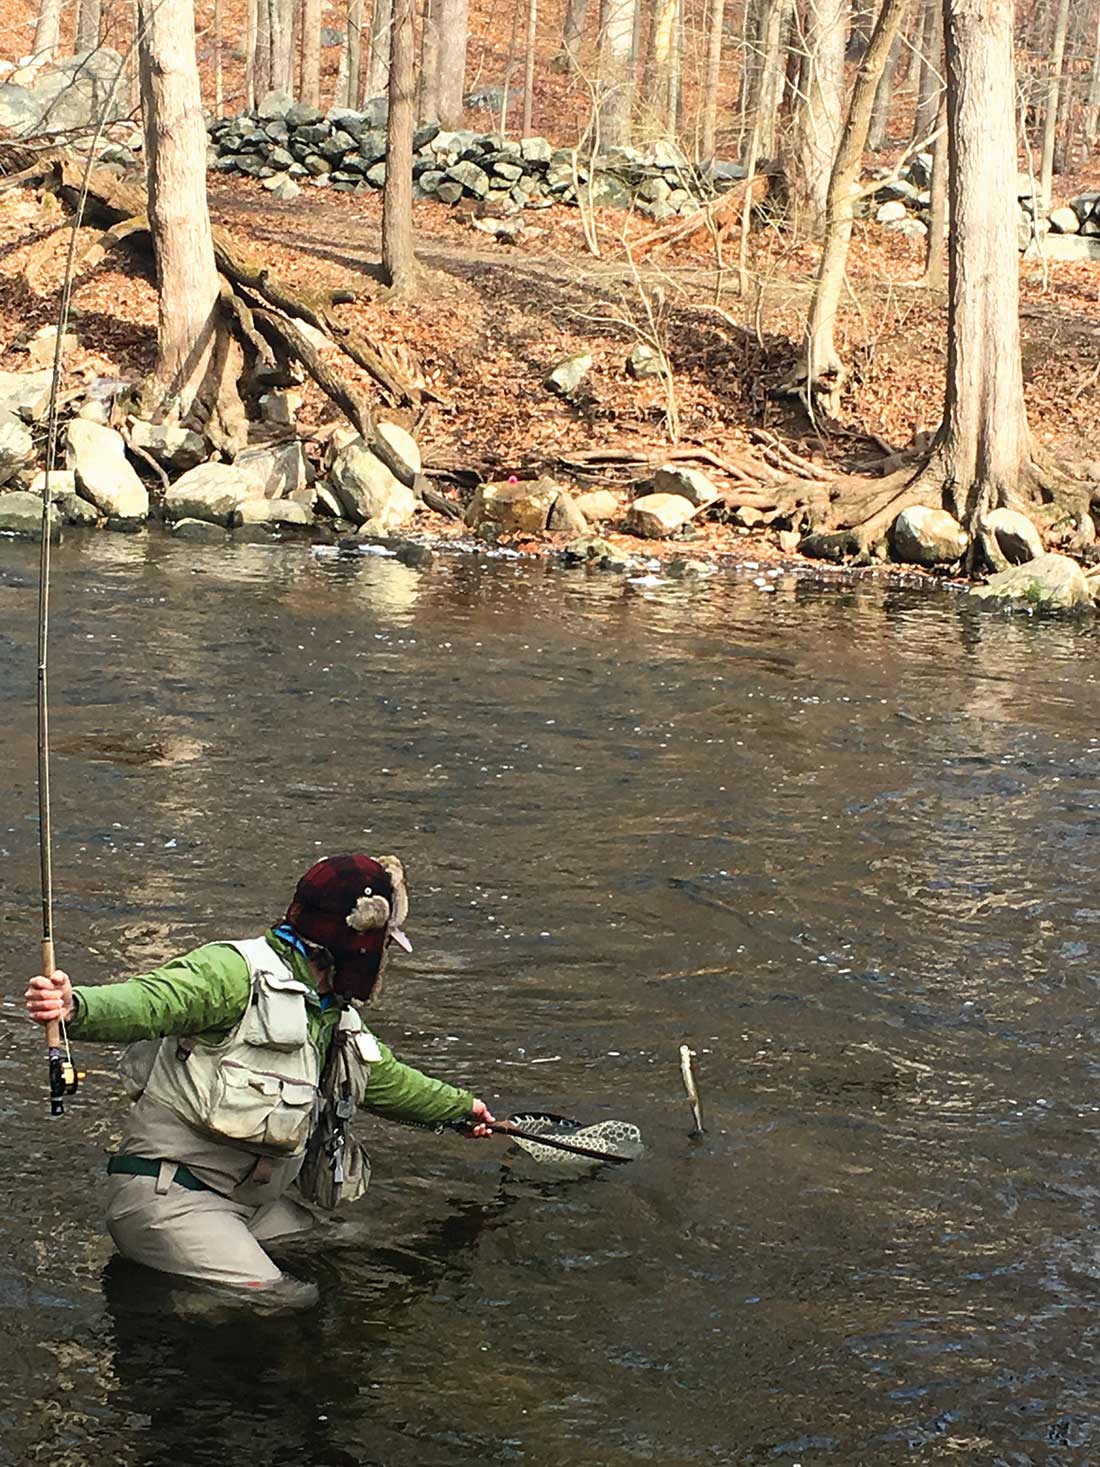 The deeper pools will hold and relinquish fish to the winter fly fisher, just be sure to dress for the weather!